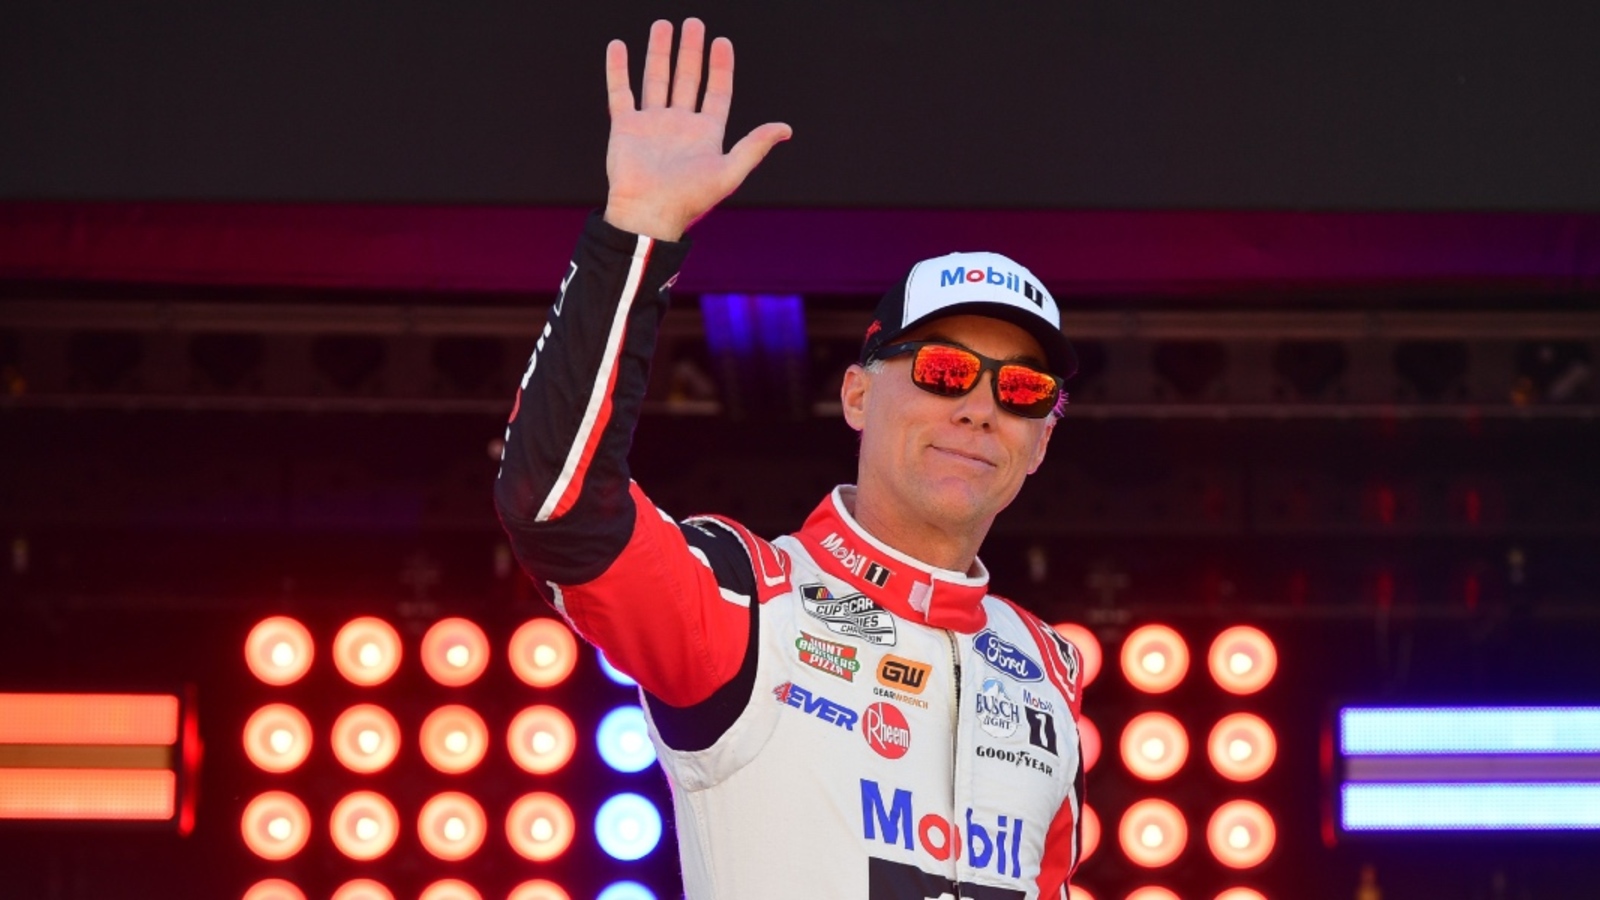 Kevin Harvick honored with renamed Kern Raceway, new role at Bakersfield track